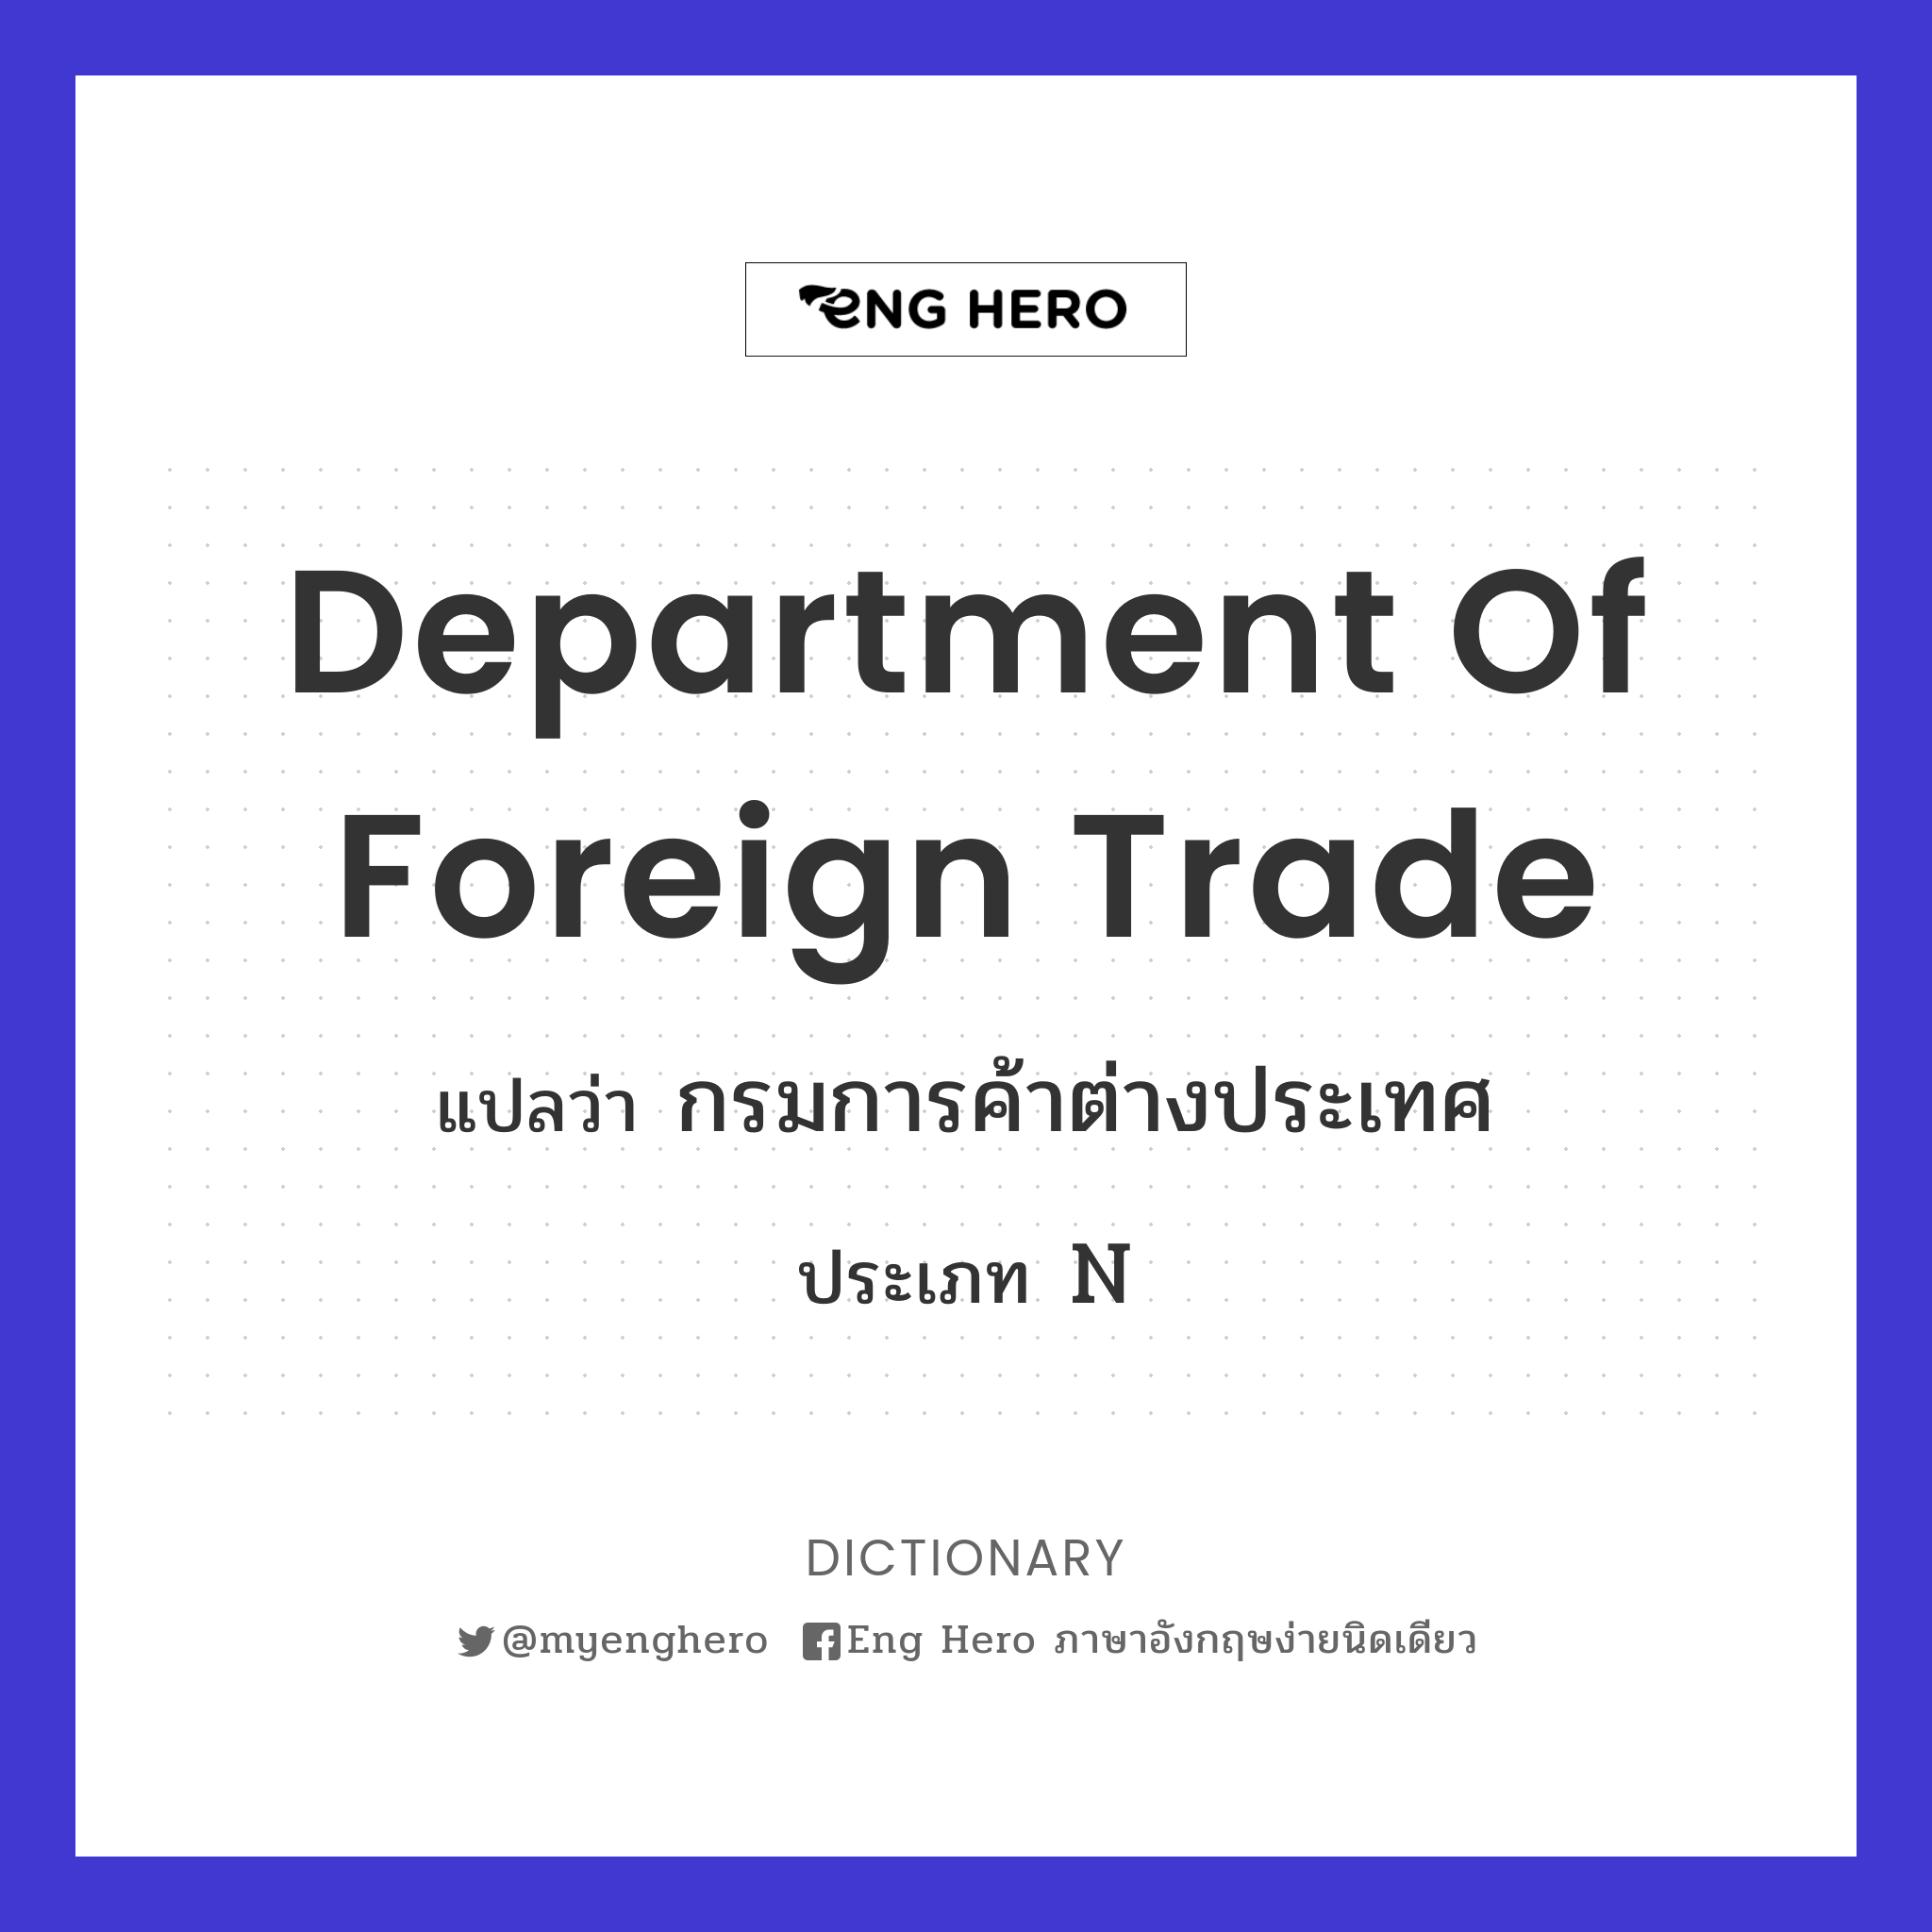 Department of Foreign Trade